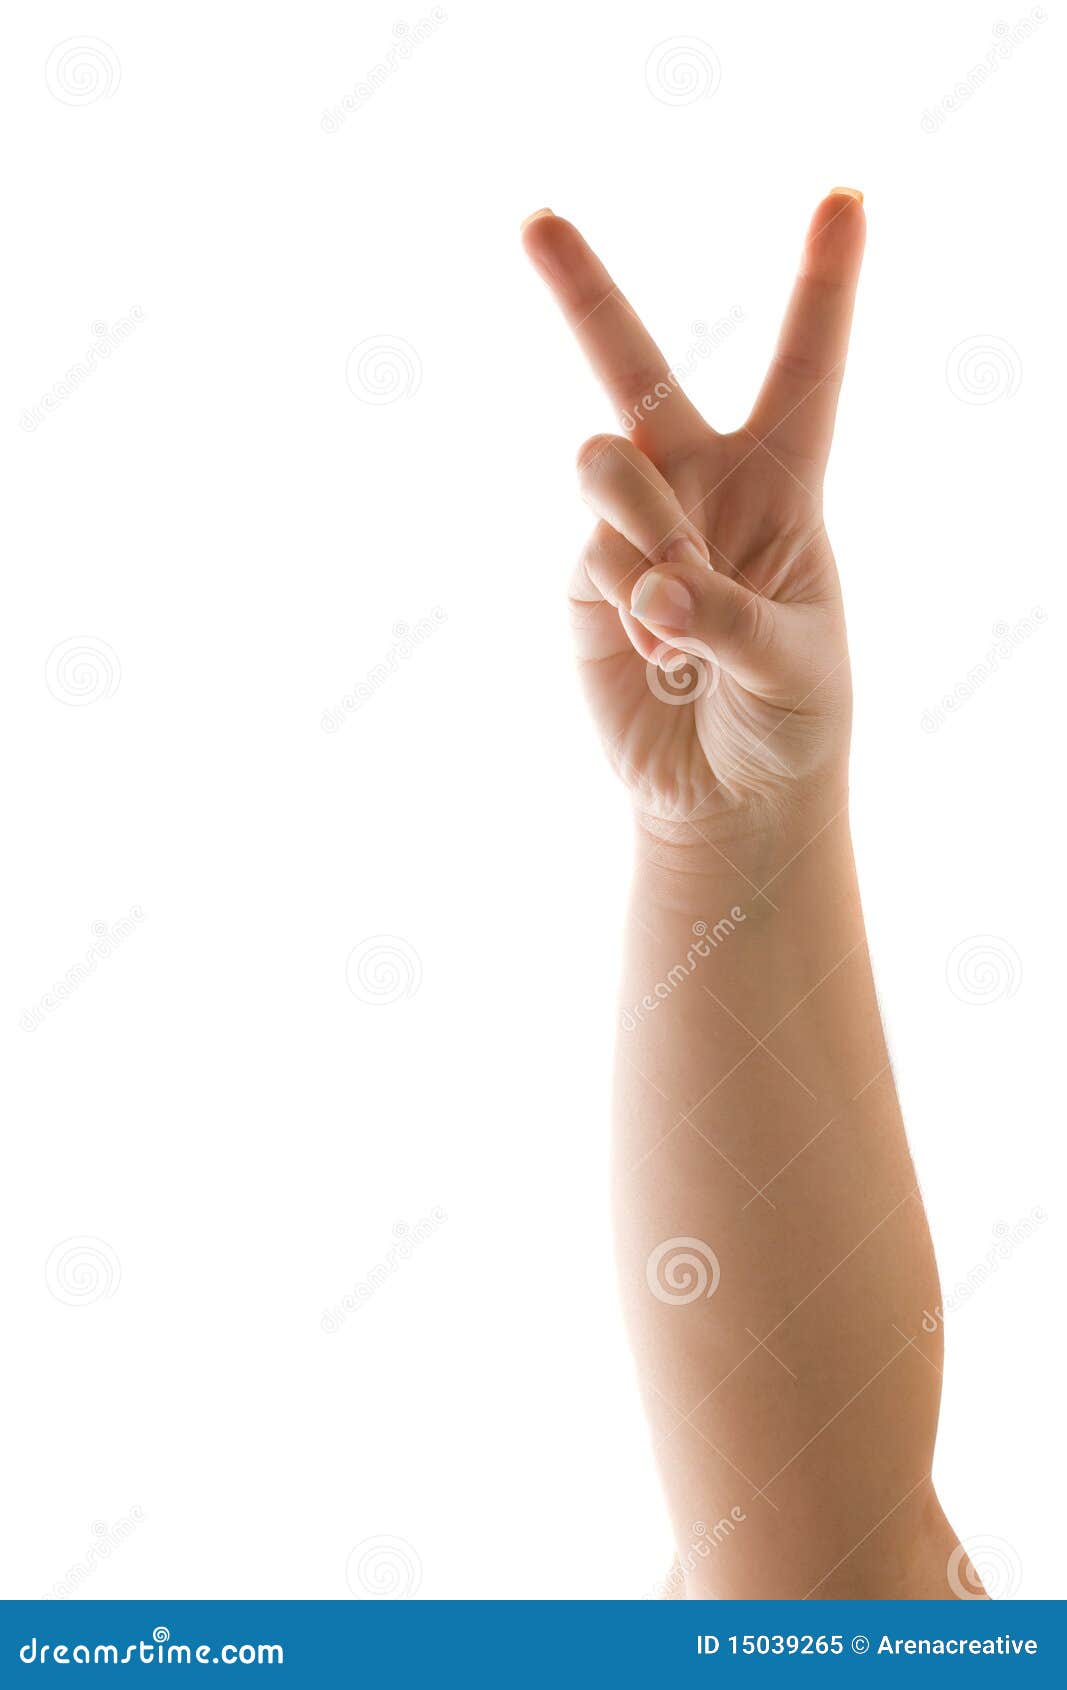 Hand Showing A Peace Sign Royalty Free Stock Photo - Image: 15039265